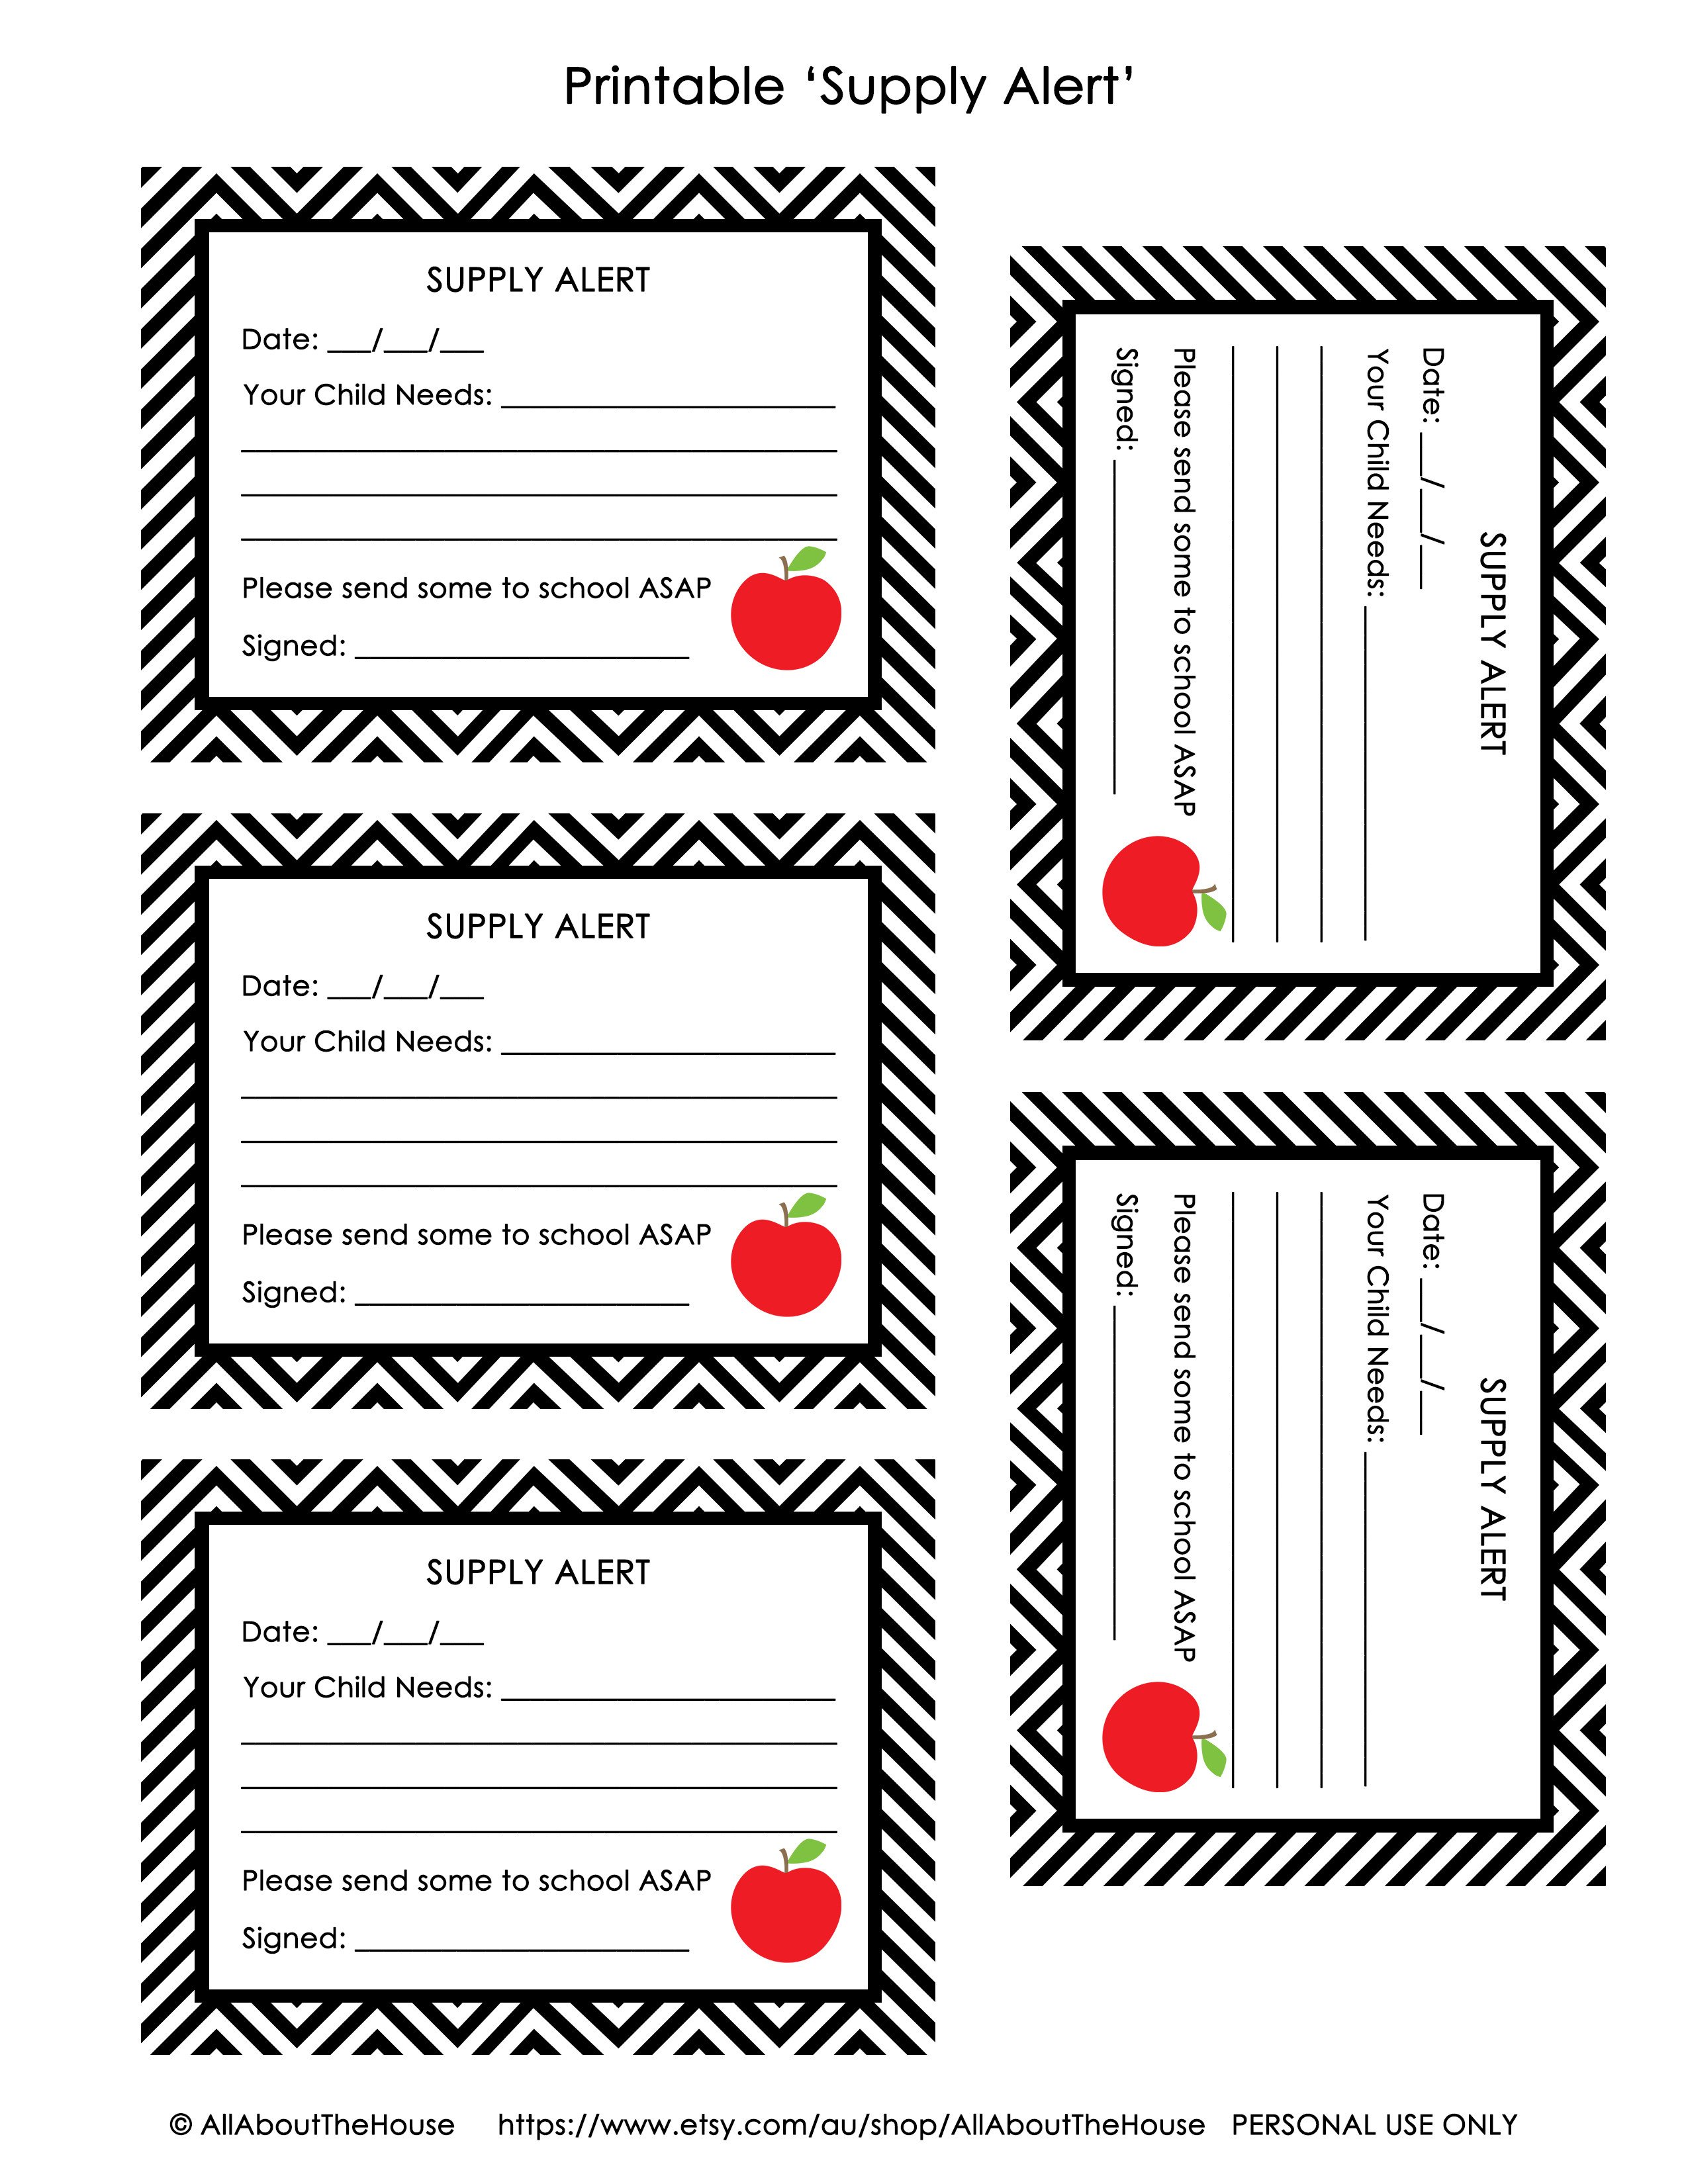 FREE Printable Hall Pass and Supply Alert Cards